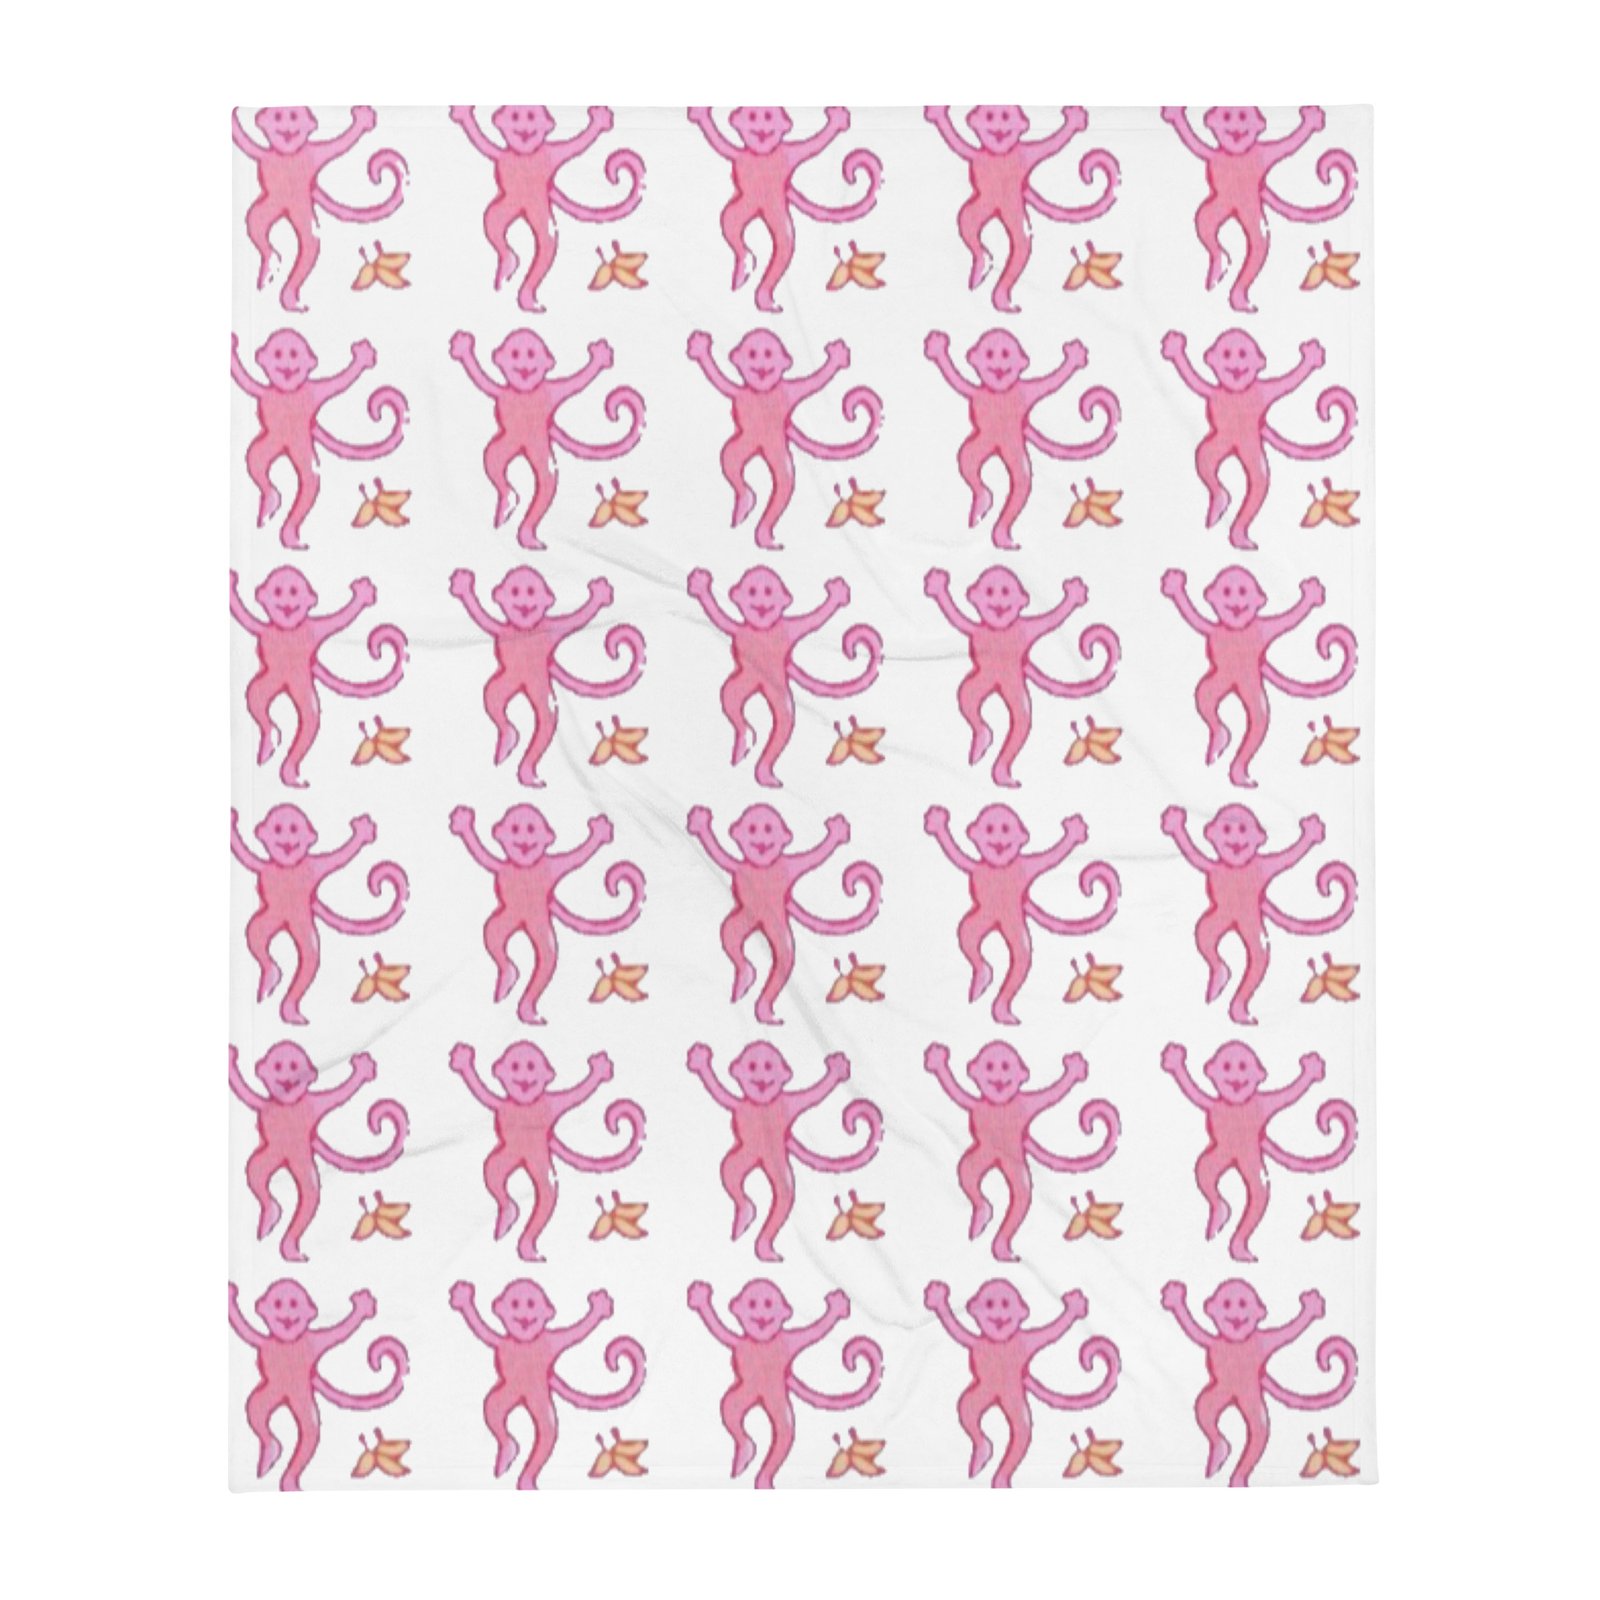 Preppy Monkey Throw Blanket. Throw blankets for couch